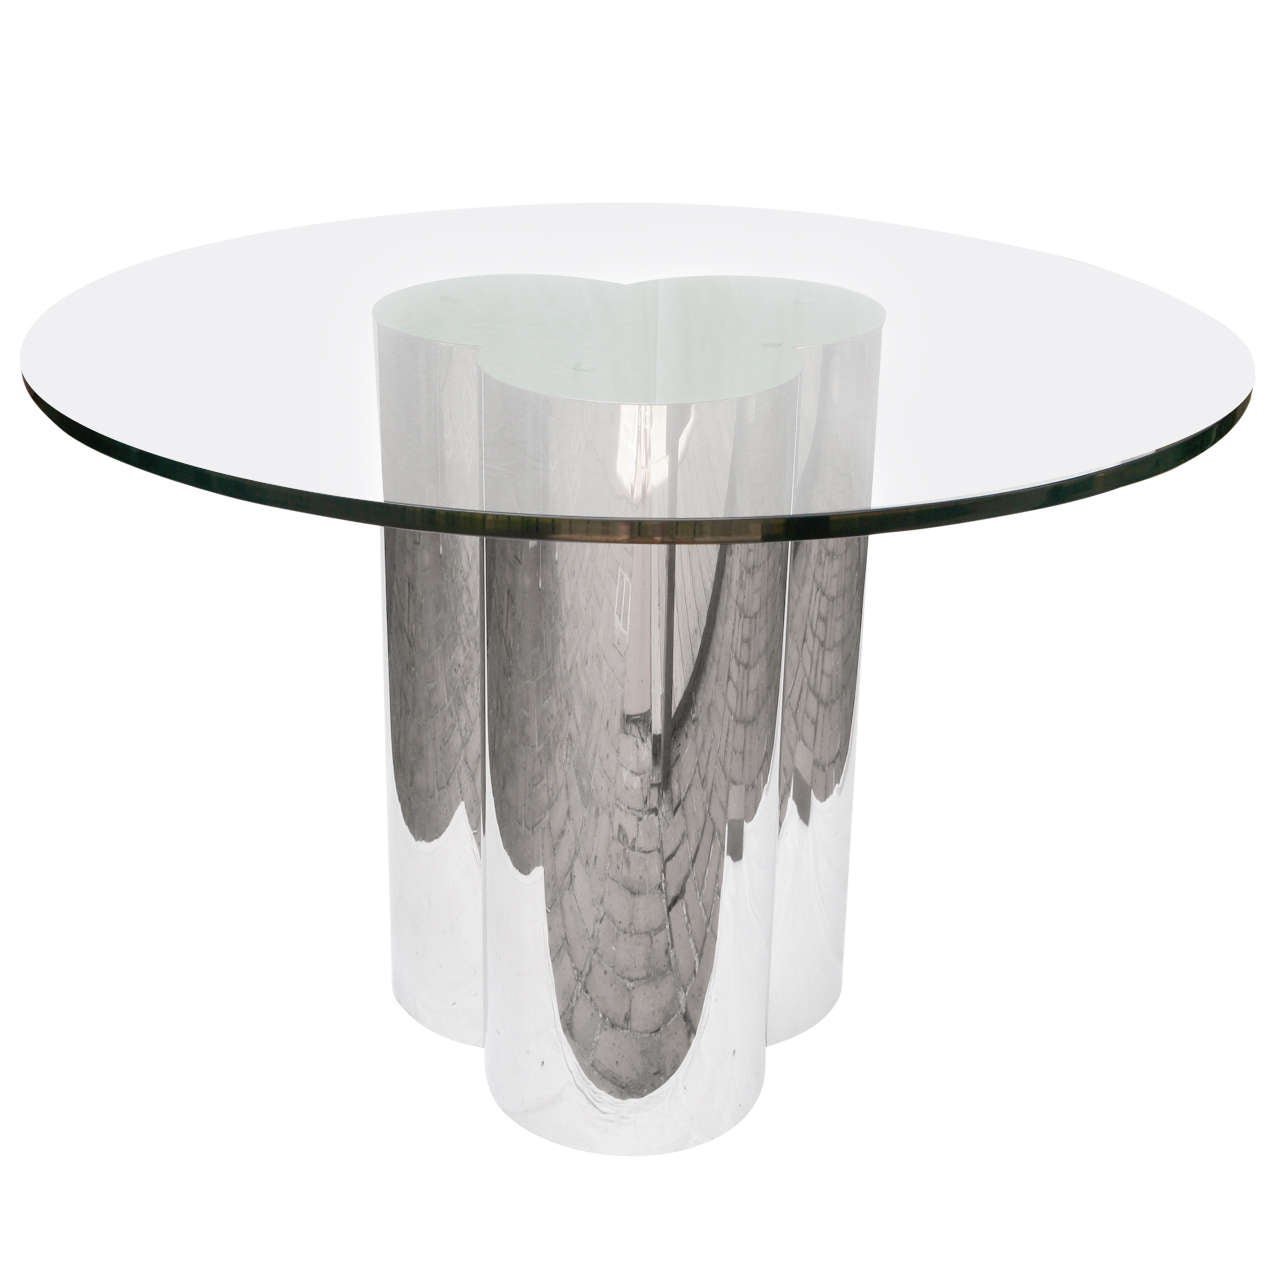 C Jere Chrome And Glass Clover Table Pace For Sale